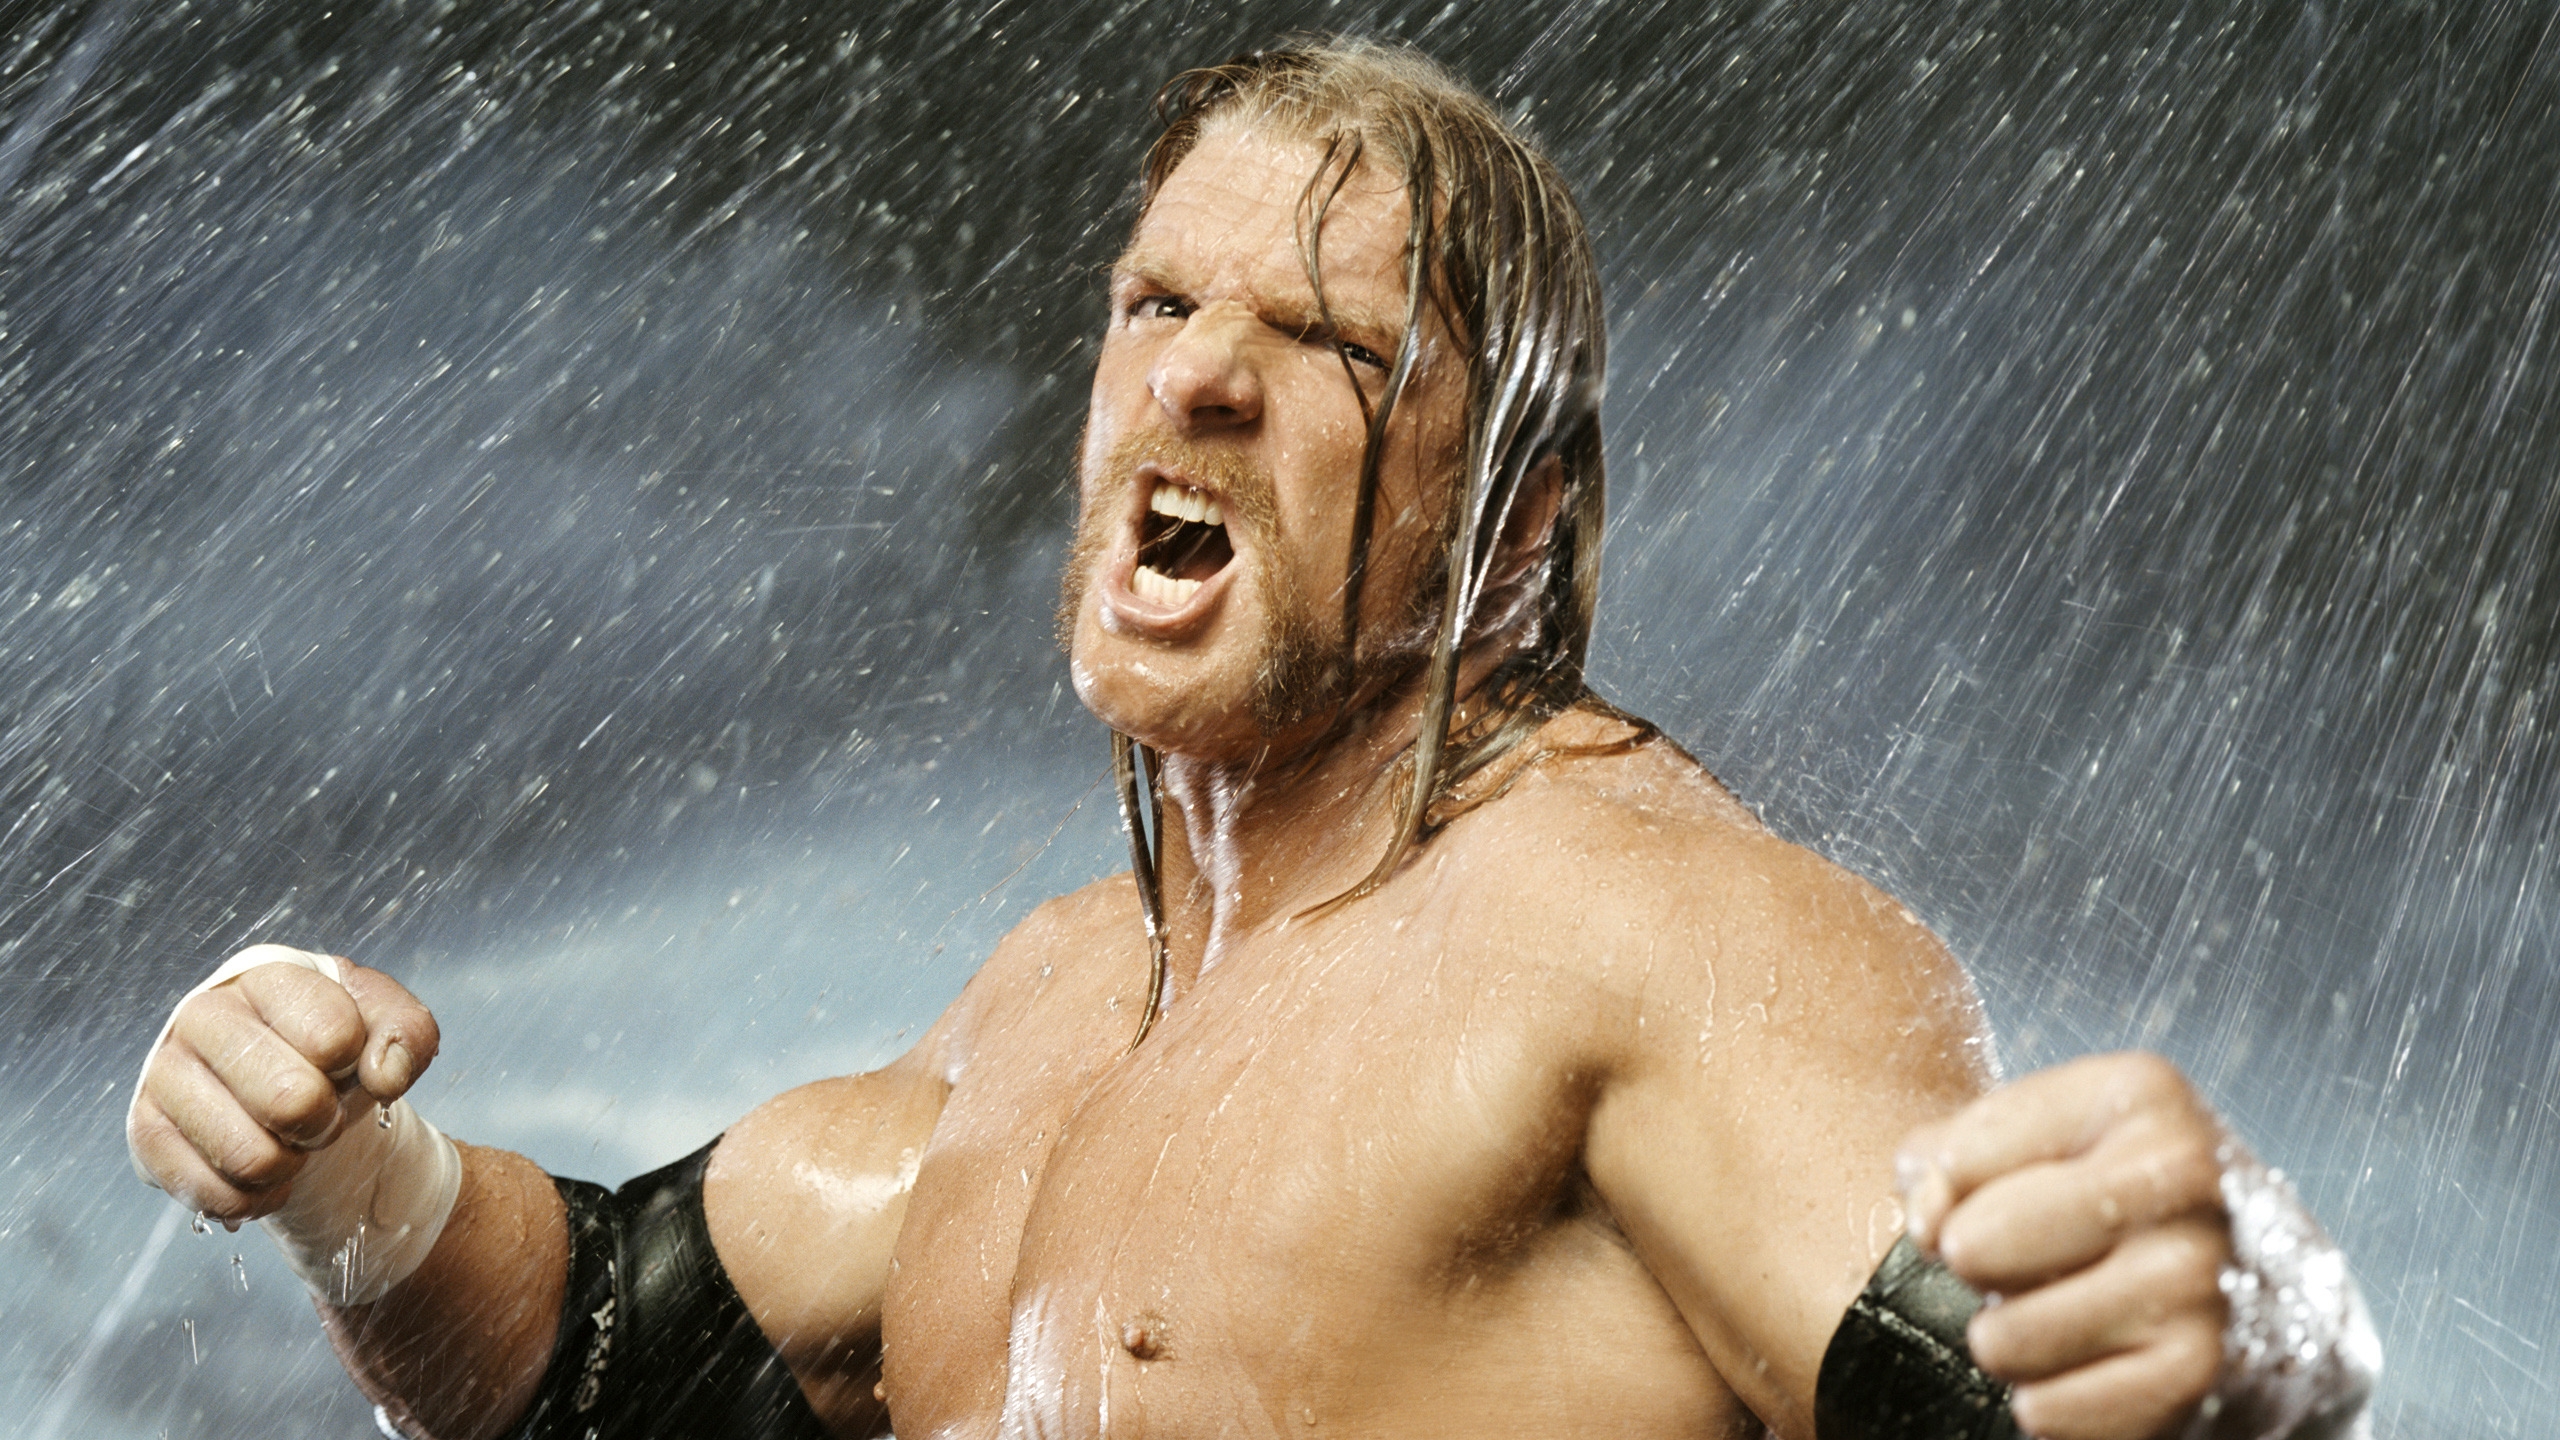 Angry Triple H for 2560x1440 HDTV resolution